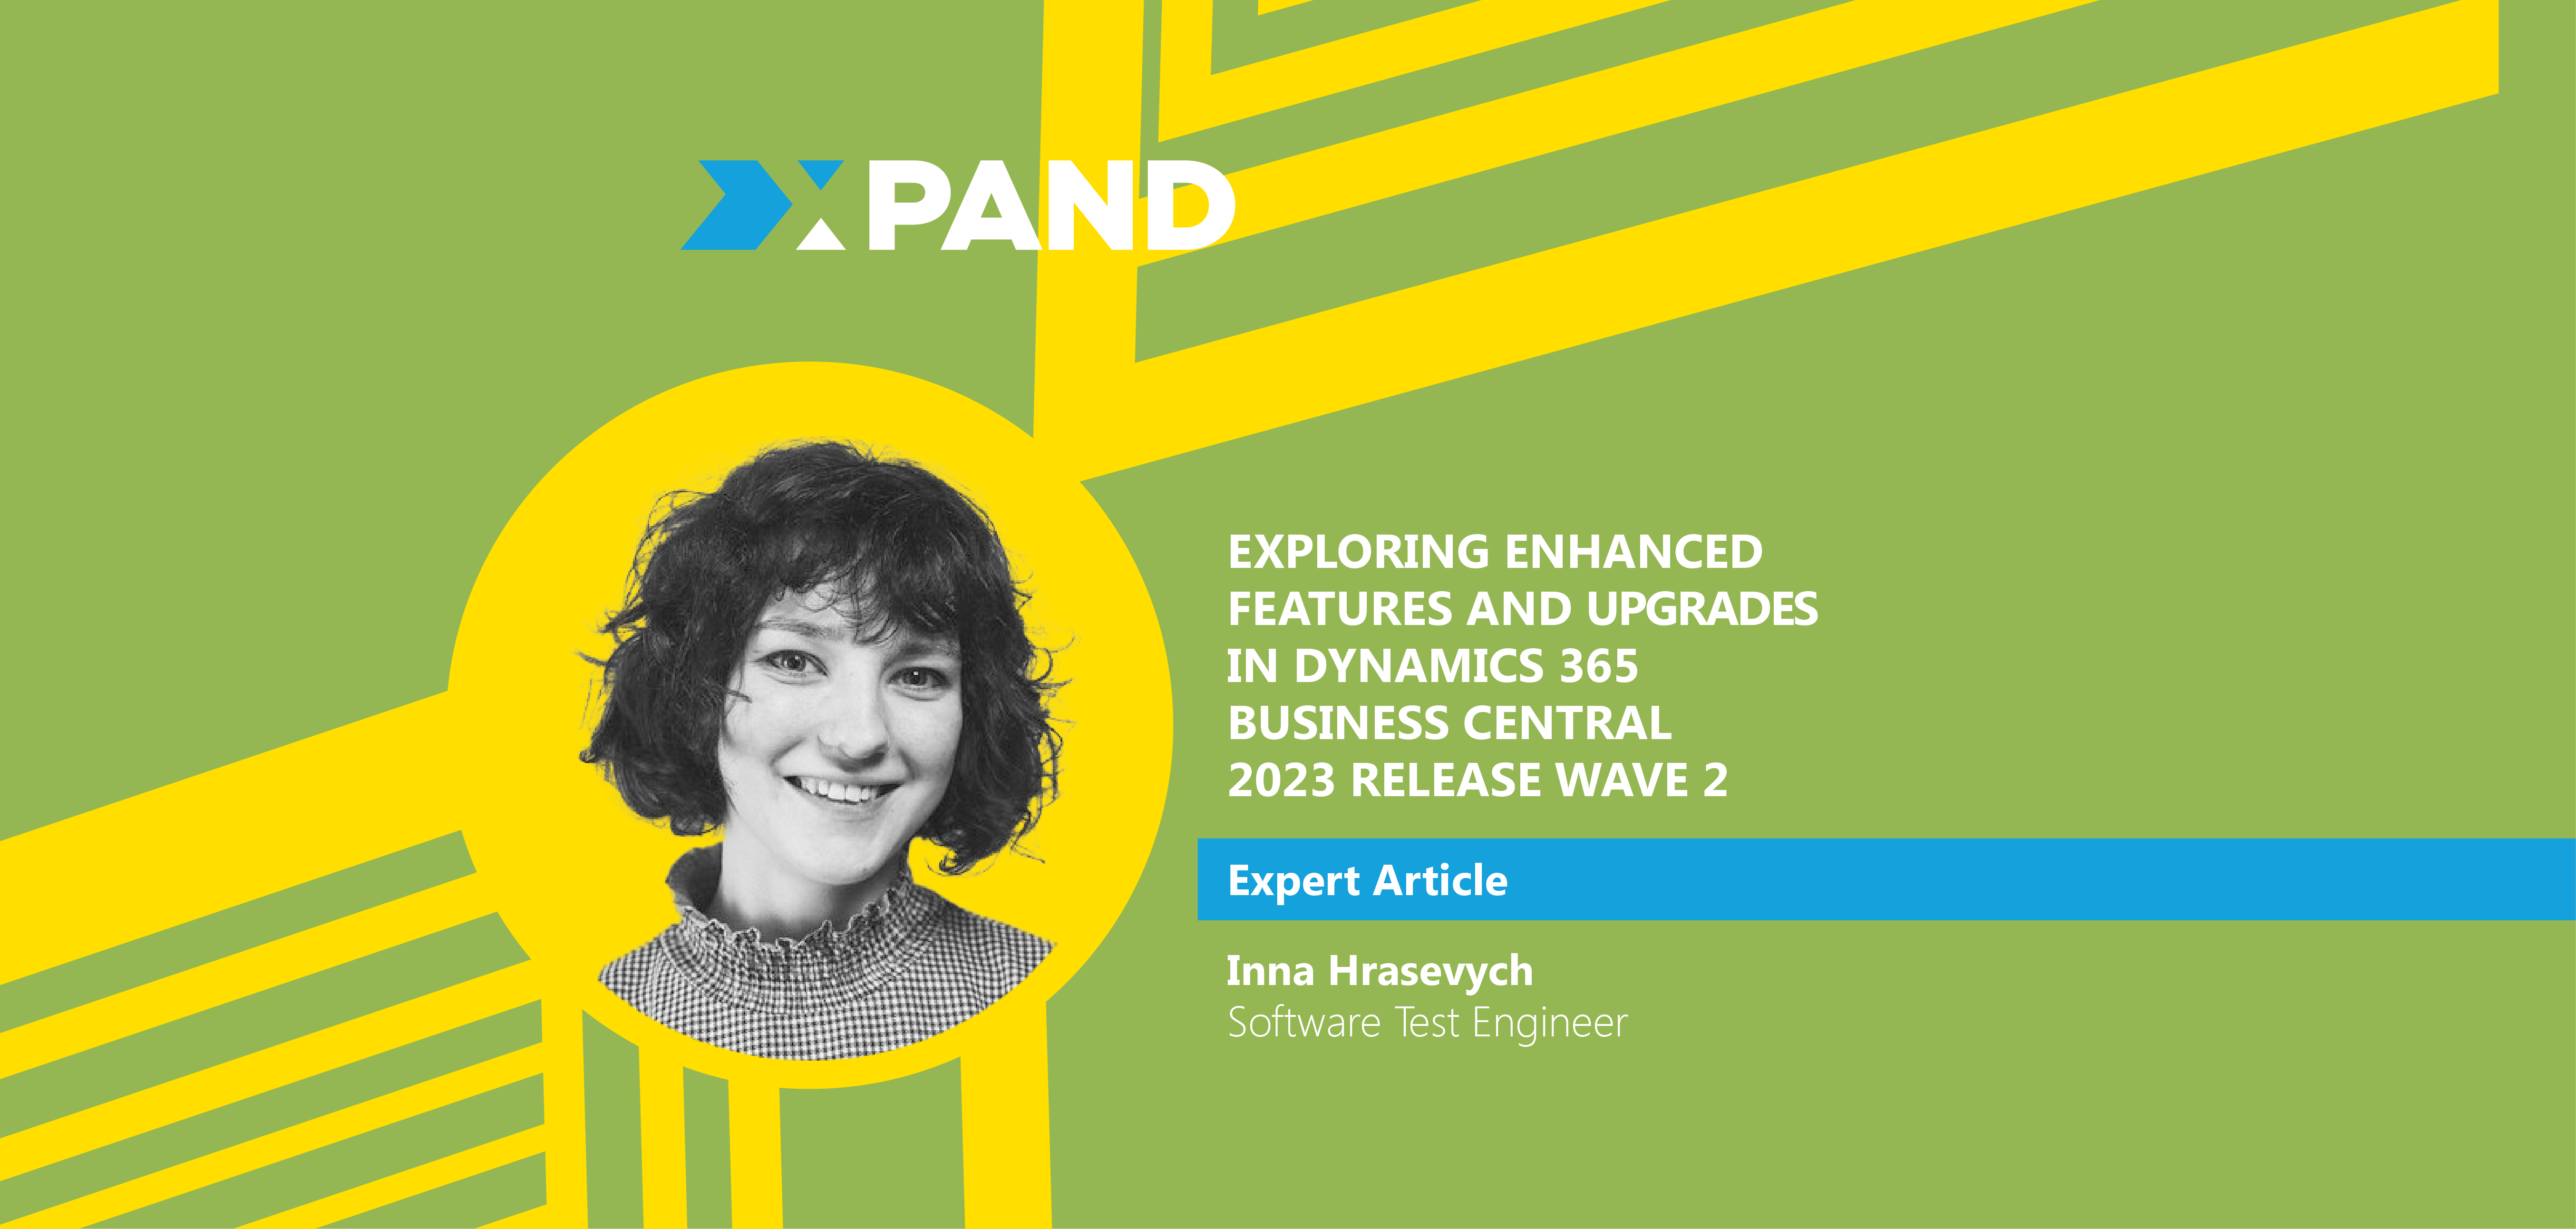 Microsoft Dynamics 365 Business Central 2023 Release Wave 2 and Xpand's upgrade services 